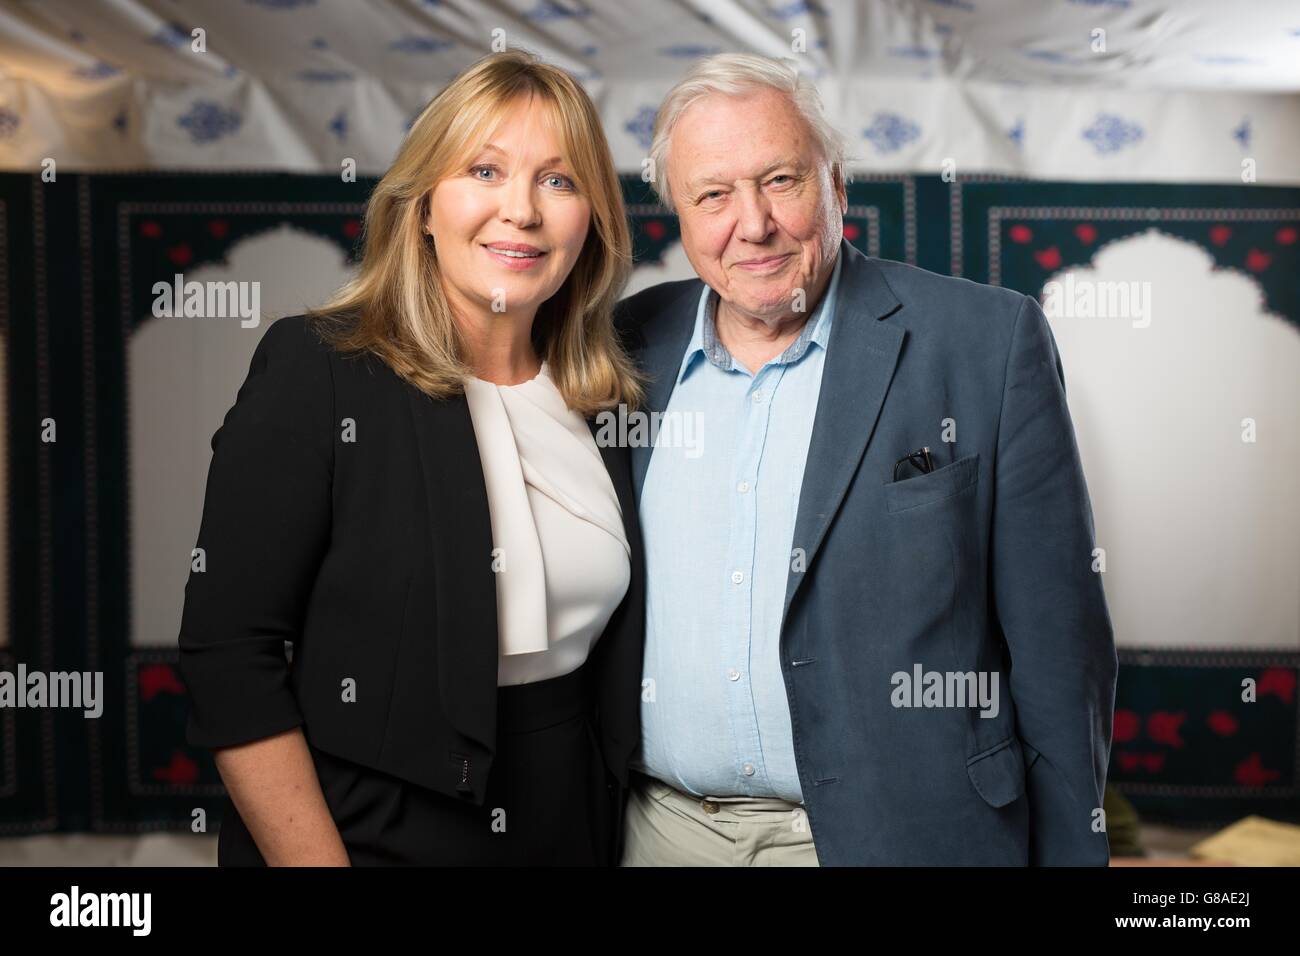 Kirsty Young and Sir David Attenborough launching the Radio Times Festival at the Green at Hampton Court Palace with a special event featuring Sir David Attenborough who now takes his place in Radio Times' inaugural Hall of Fame talking about his 60 years in broadcasting. Stock Photo